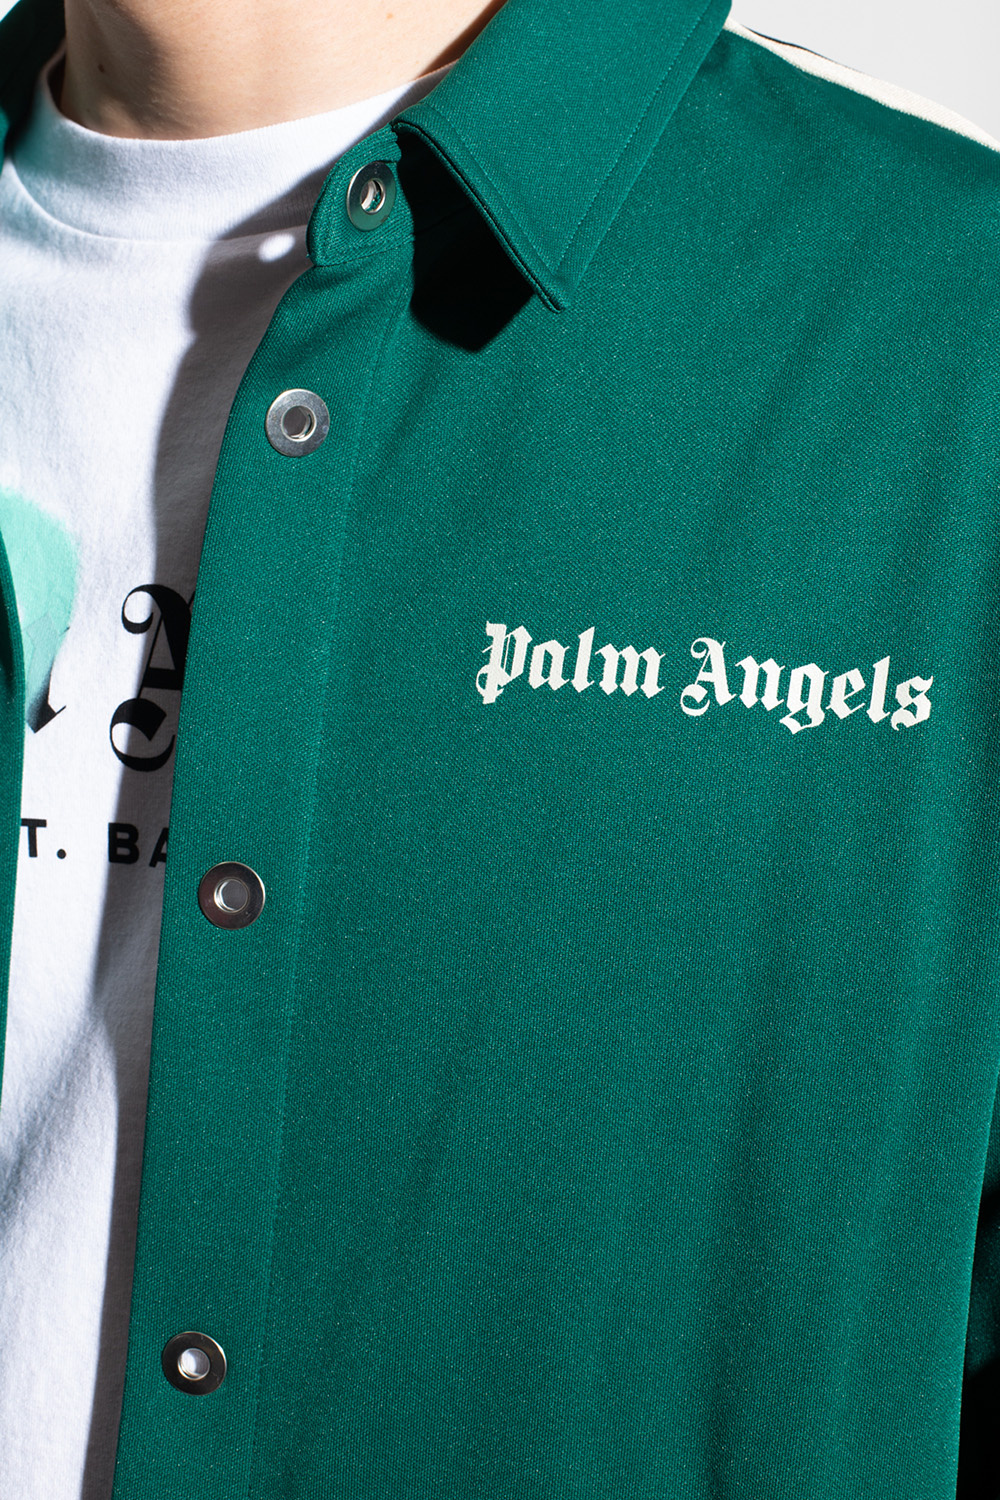 Palm Angels Shirt with logo